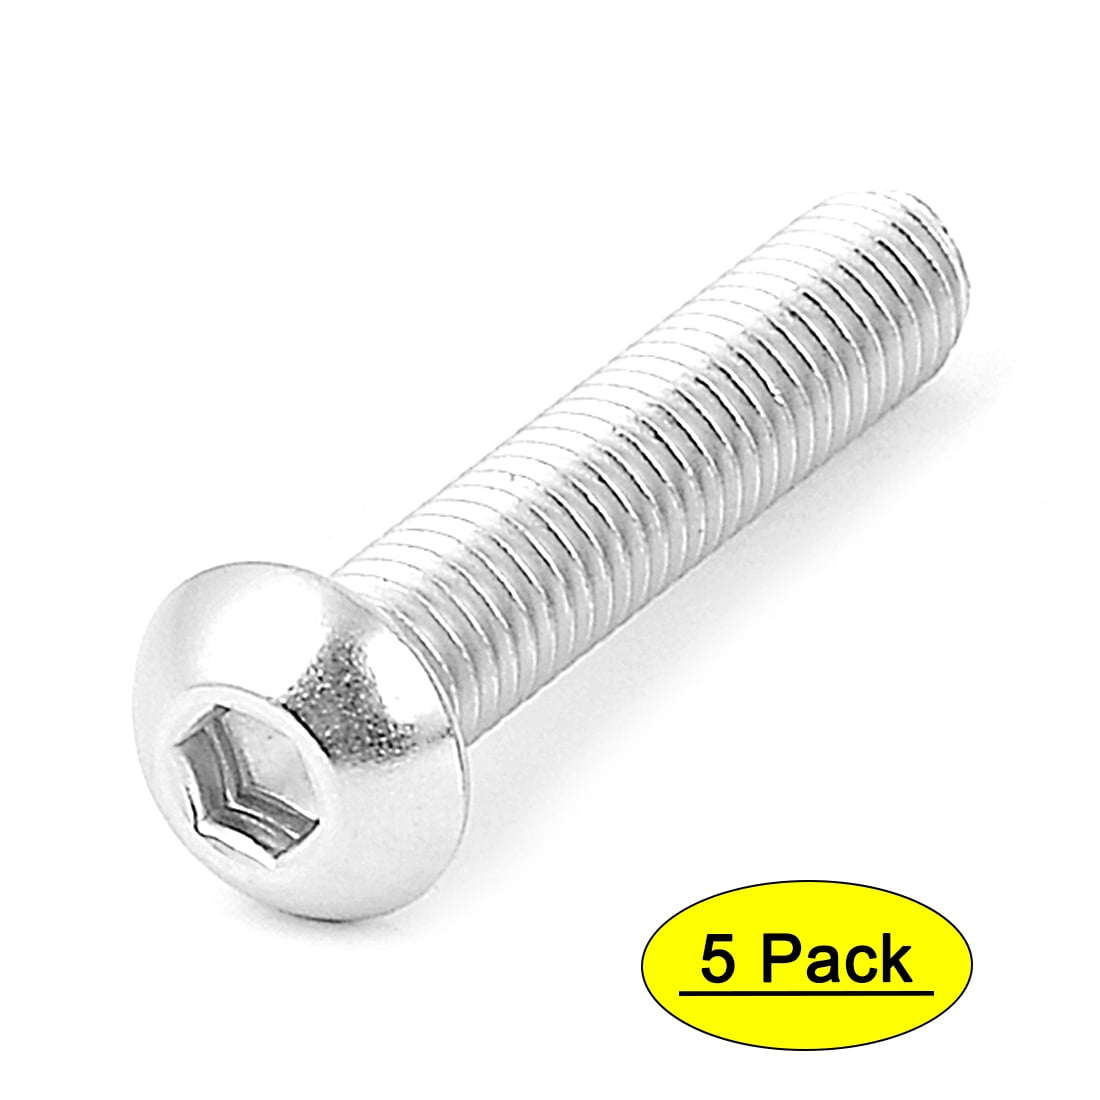 Stainless Steel M3 X 30 mm Button Socket Head Screw A2 pack of 20 